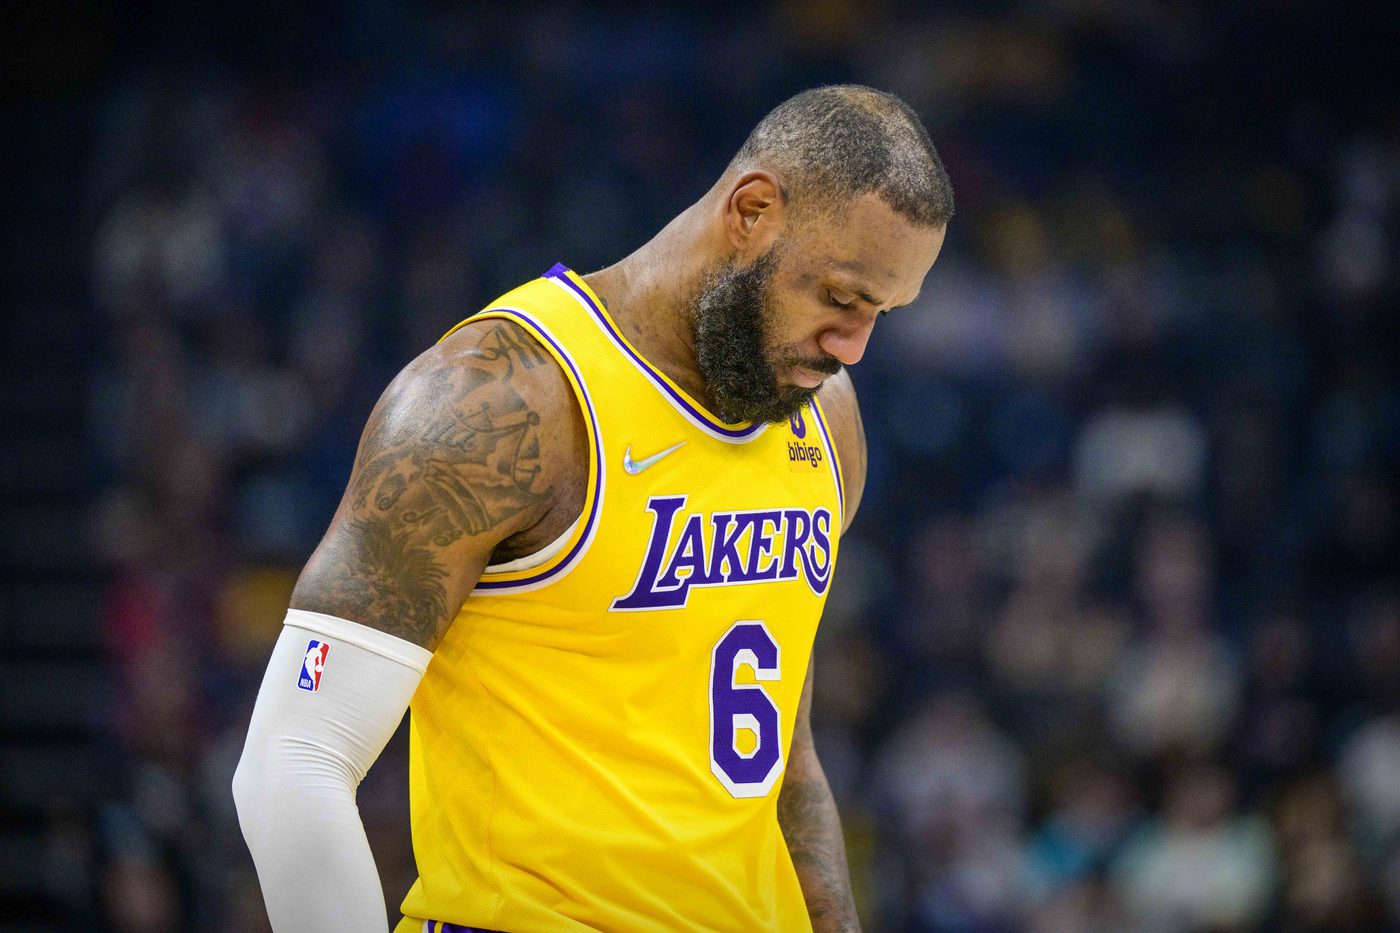 Dec 29, 2021; Memphis, Tennessee, USA; Los Angeles Lakers forward LeBron James (6) looks down during the second half against the Memphis Grizzlies at the FedExForum.